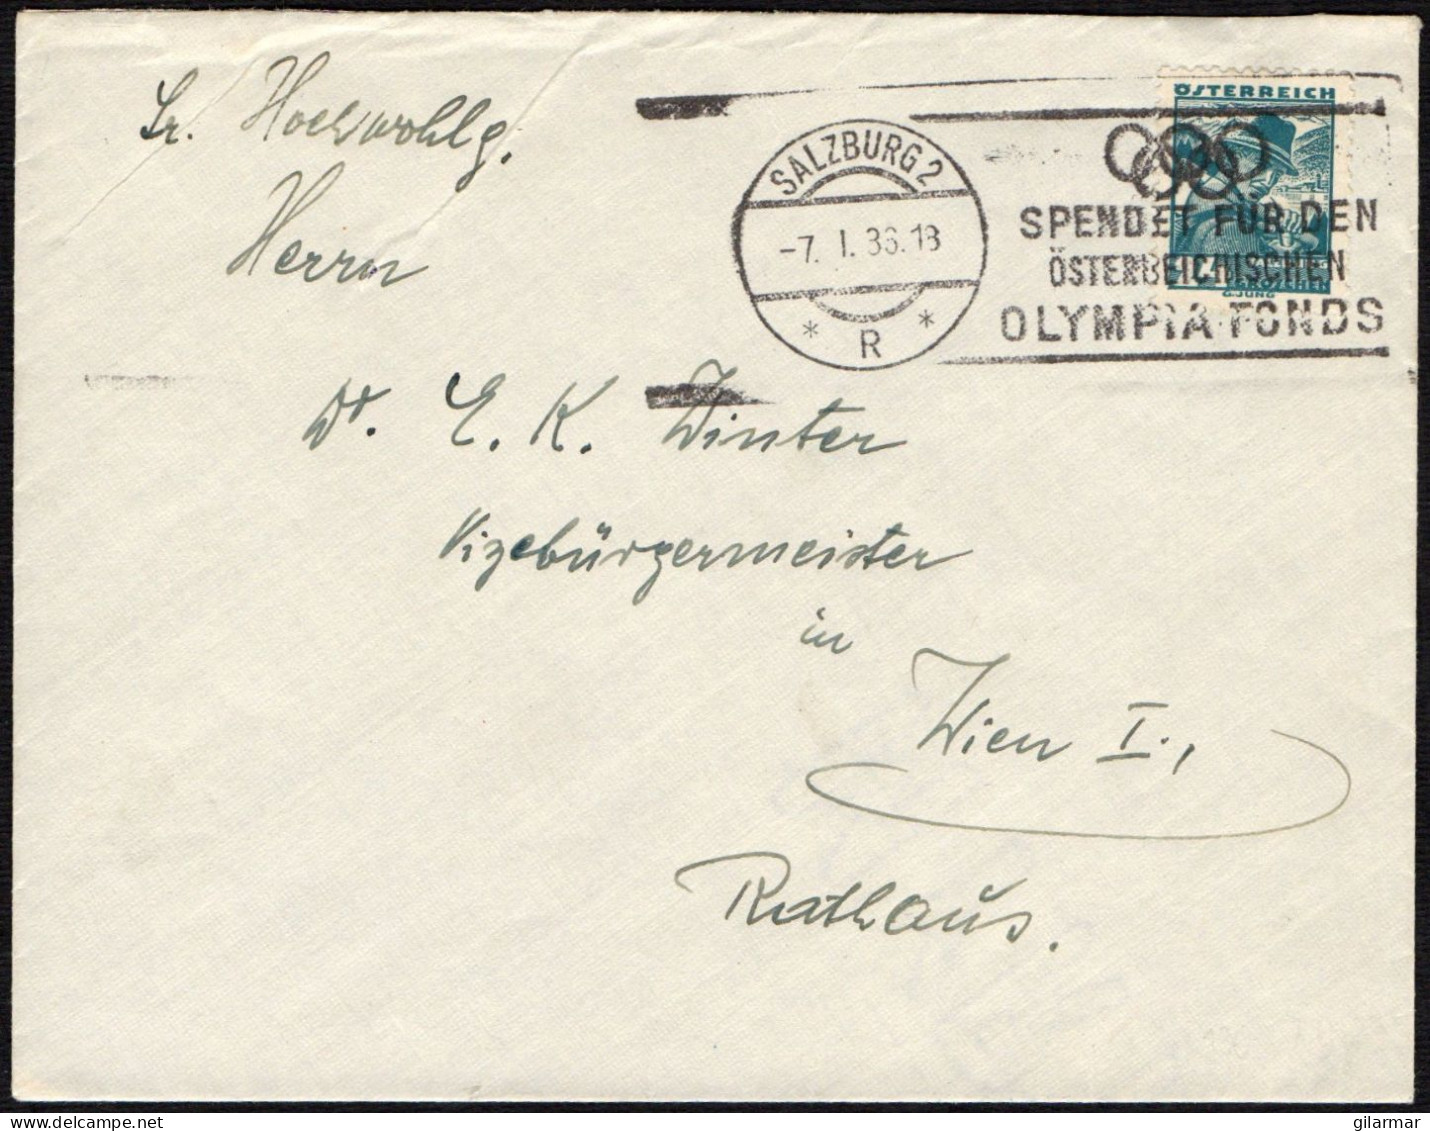 OLYMPIC GAMES 1936 - AUSTRIA SALZBURG 1936 - DONATE TO THE AUSTRIAN OLYMPIC FUND - MAILED ENVELOPE - M - Ete 1936: Berlin